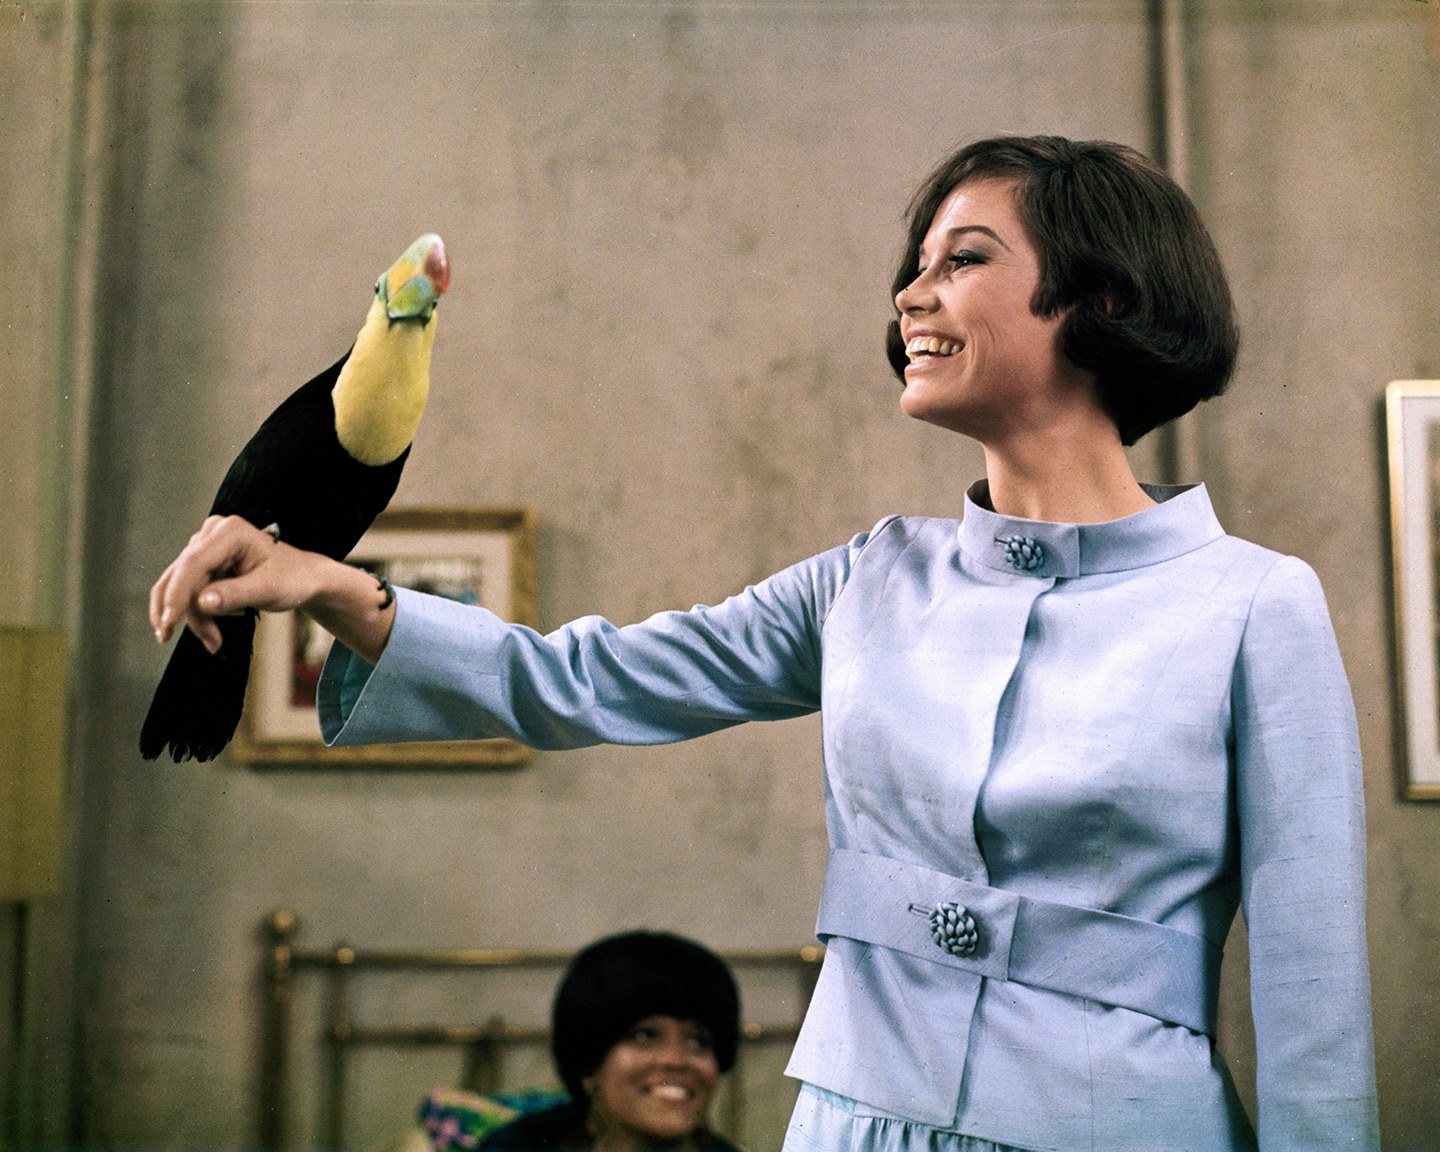 https://flashbak.com/wp-content/uploads/2019/02/Mary-Tyler-Moore-A-SCENE-FROM-WHAT%E2%80%99S-SO-BAD-ABOUT-FEELING-GOOD-1968.jpg